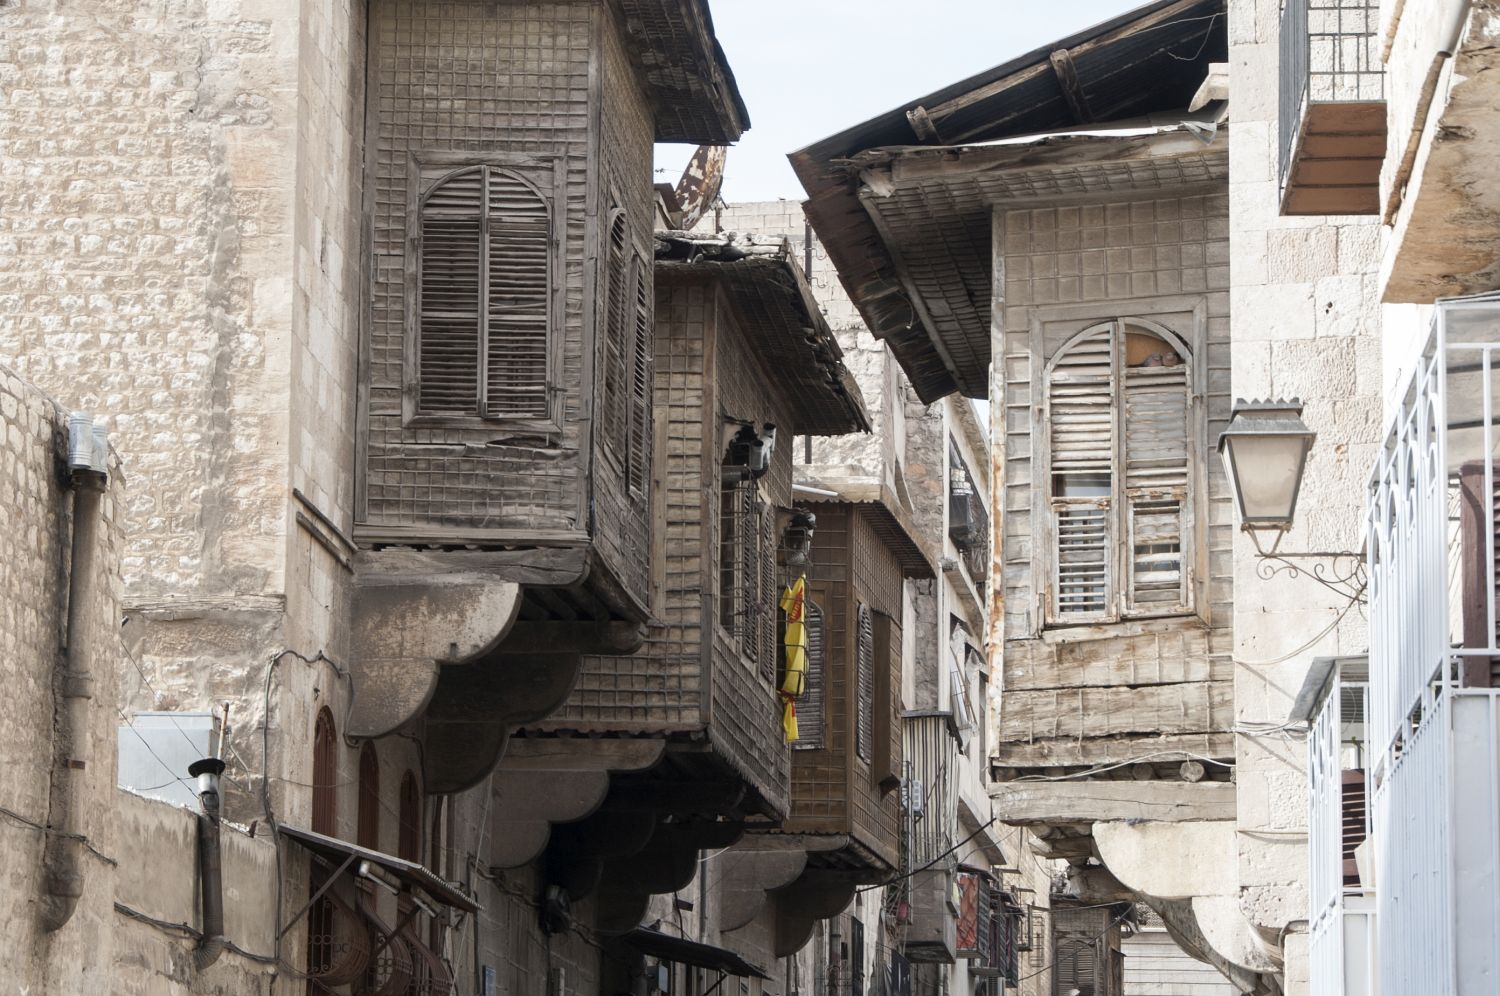 View down a street in Aleppo, Syria with overhanging wooden balconies.